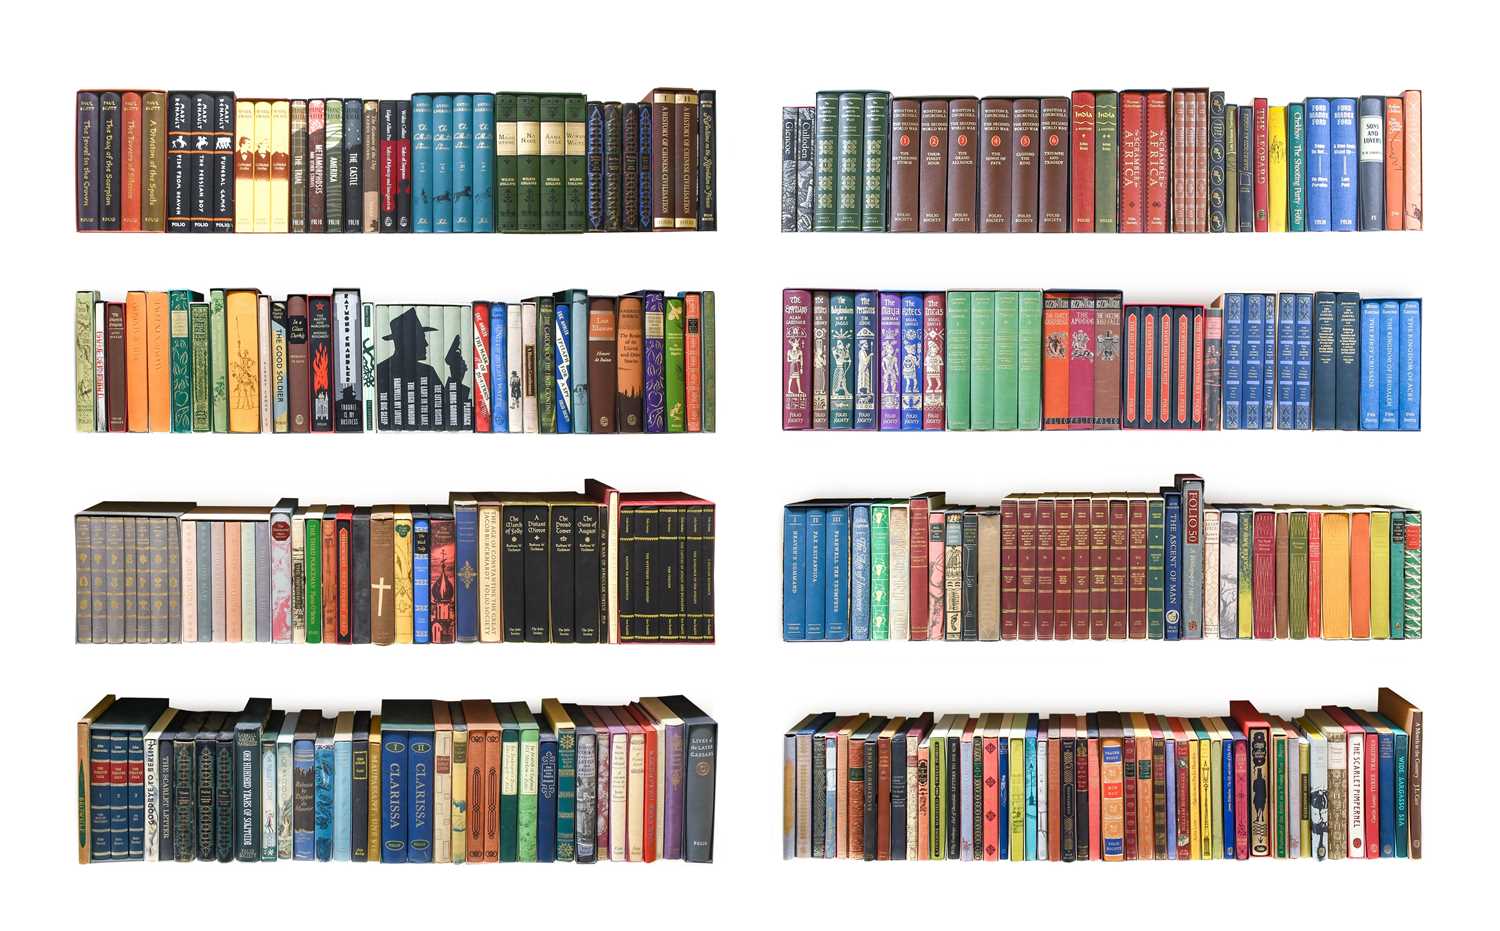 Folio Society. A large collection of books published by the Folio Society, including literature